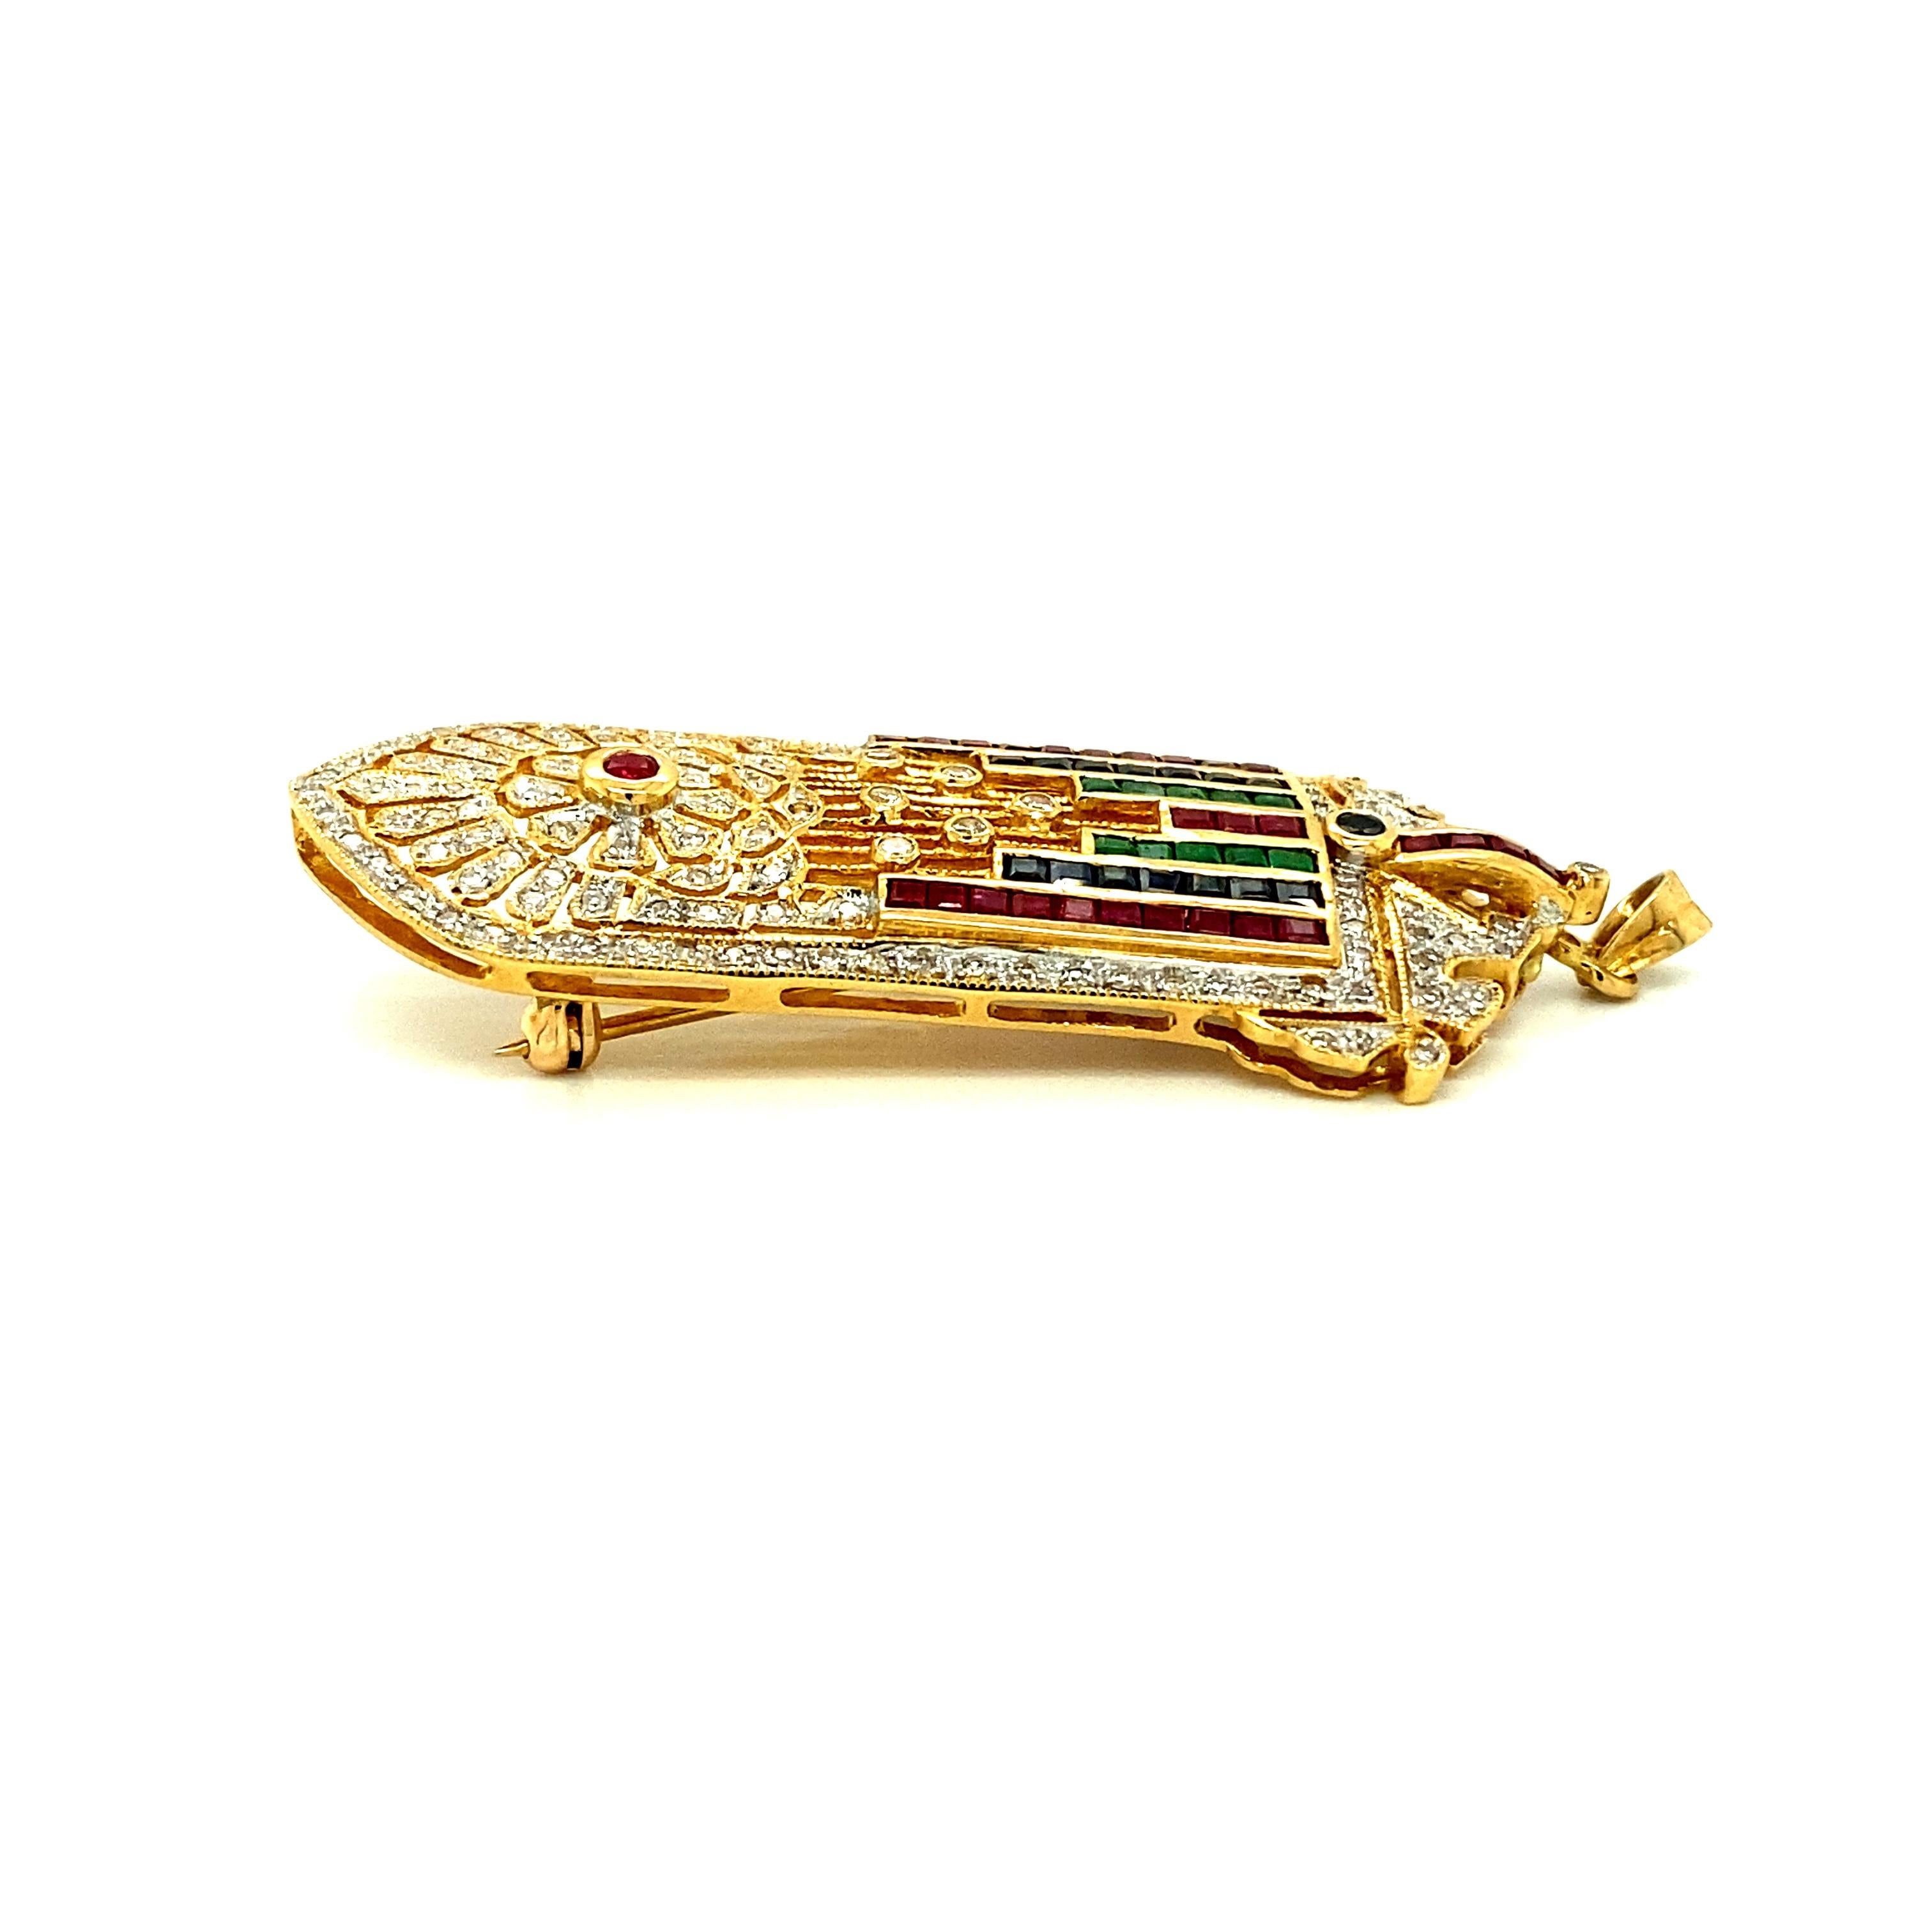 Offered here is an Art Deco Style Pendant made in 18kt Yellow Gold 
Weighted 13.60 gr. 
Adorned with 130 diamonds weighing approximately 1 ct & 53 gemstones, natural Sapphires, Ruby’s & Emeralds weighing about 2.20 ct total. 
Length: 2” x 3/4”